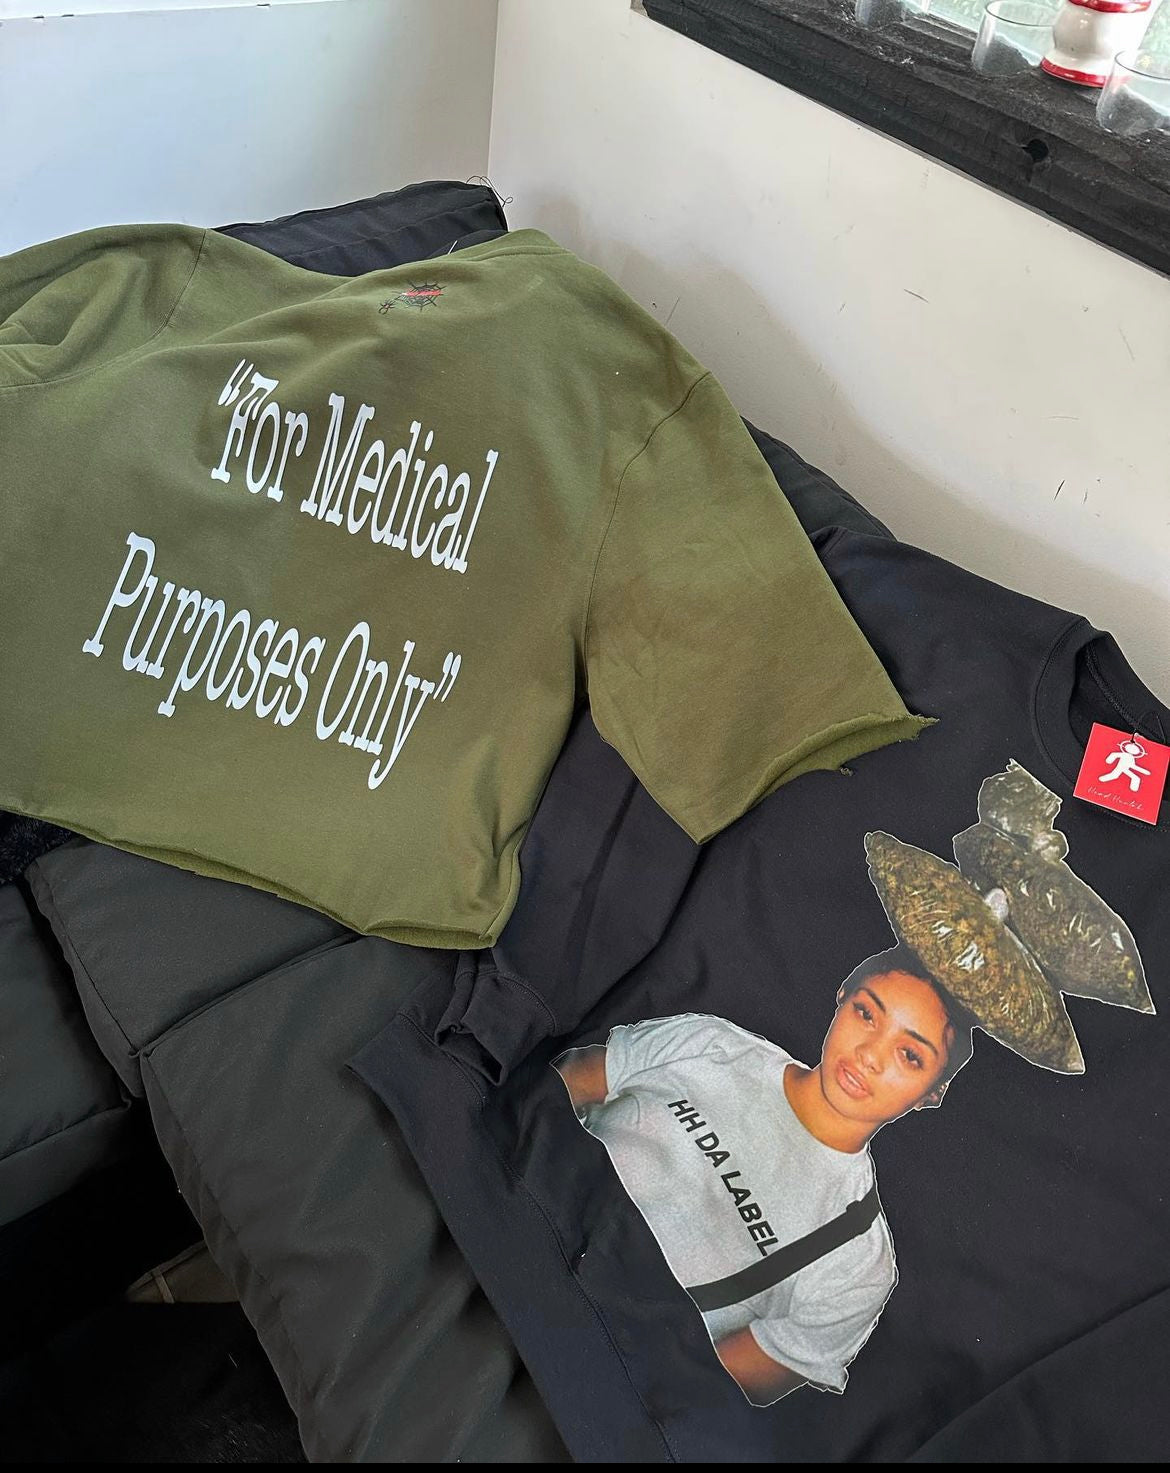 “FOR MEDICAL PURPOSES ONLY” CREWNECK